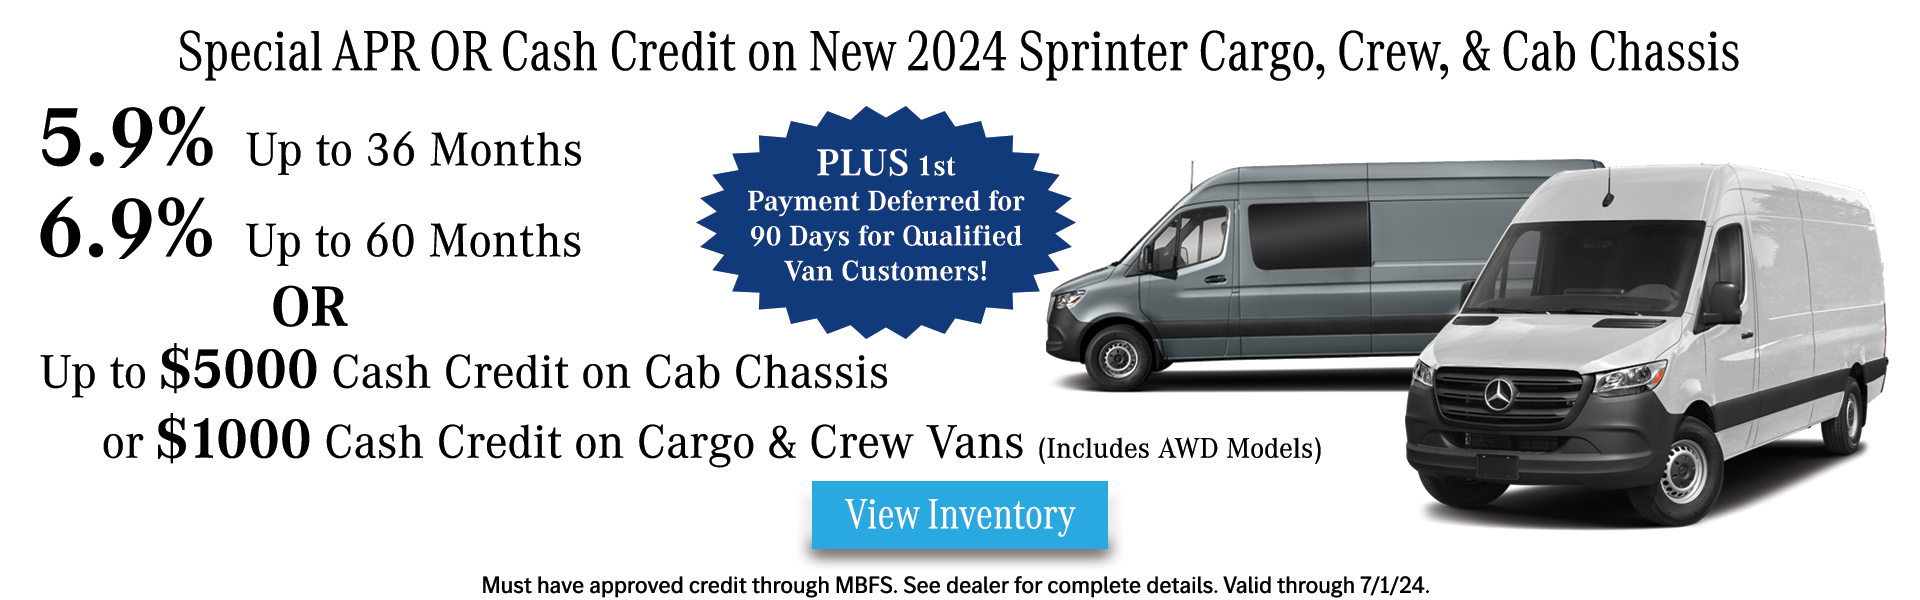 Special APR on New 2024 Sprinters